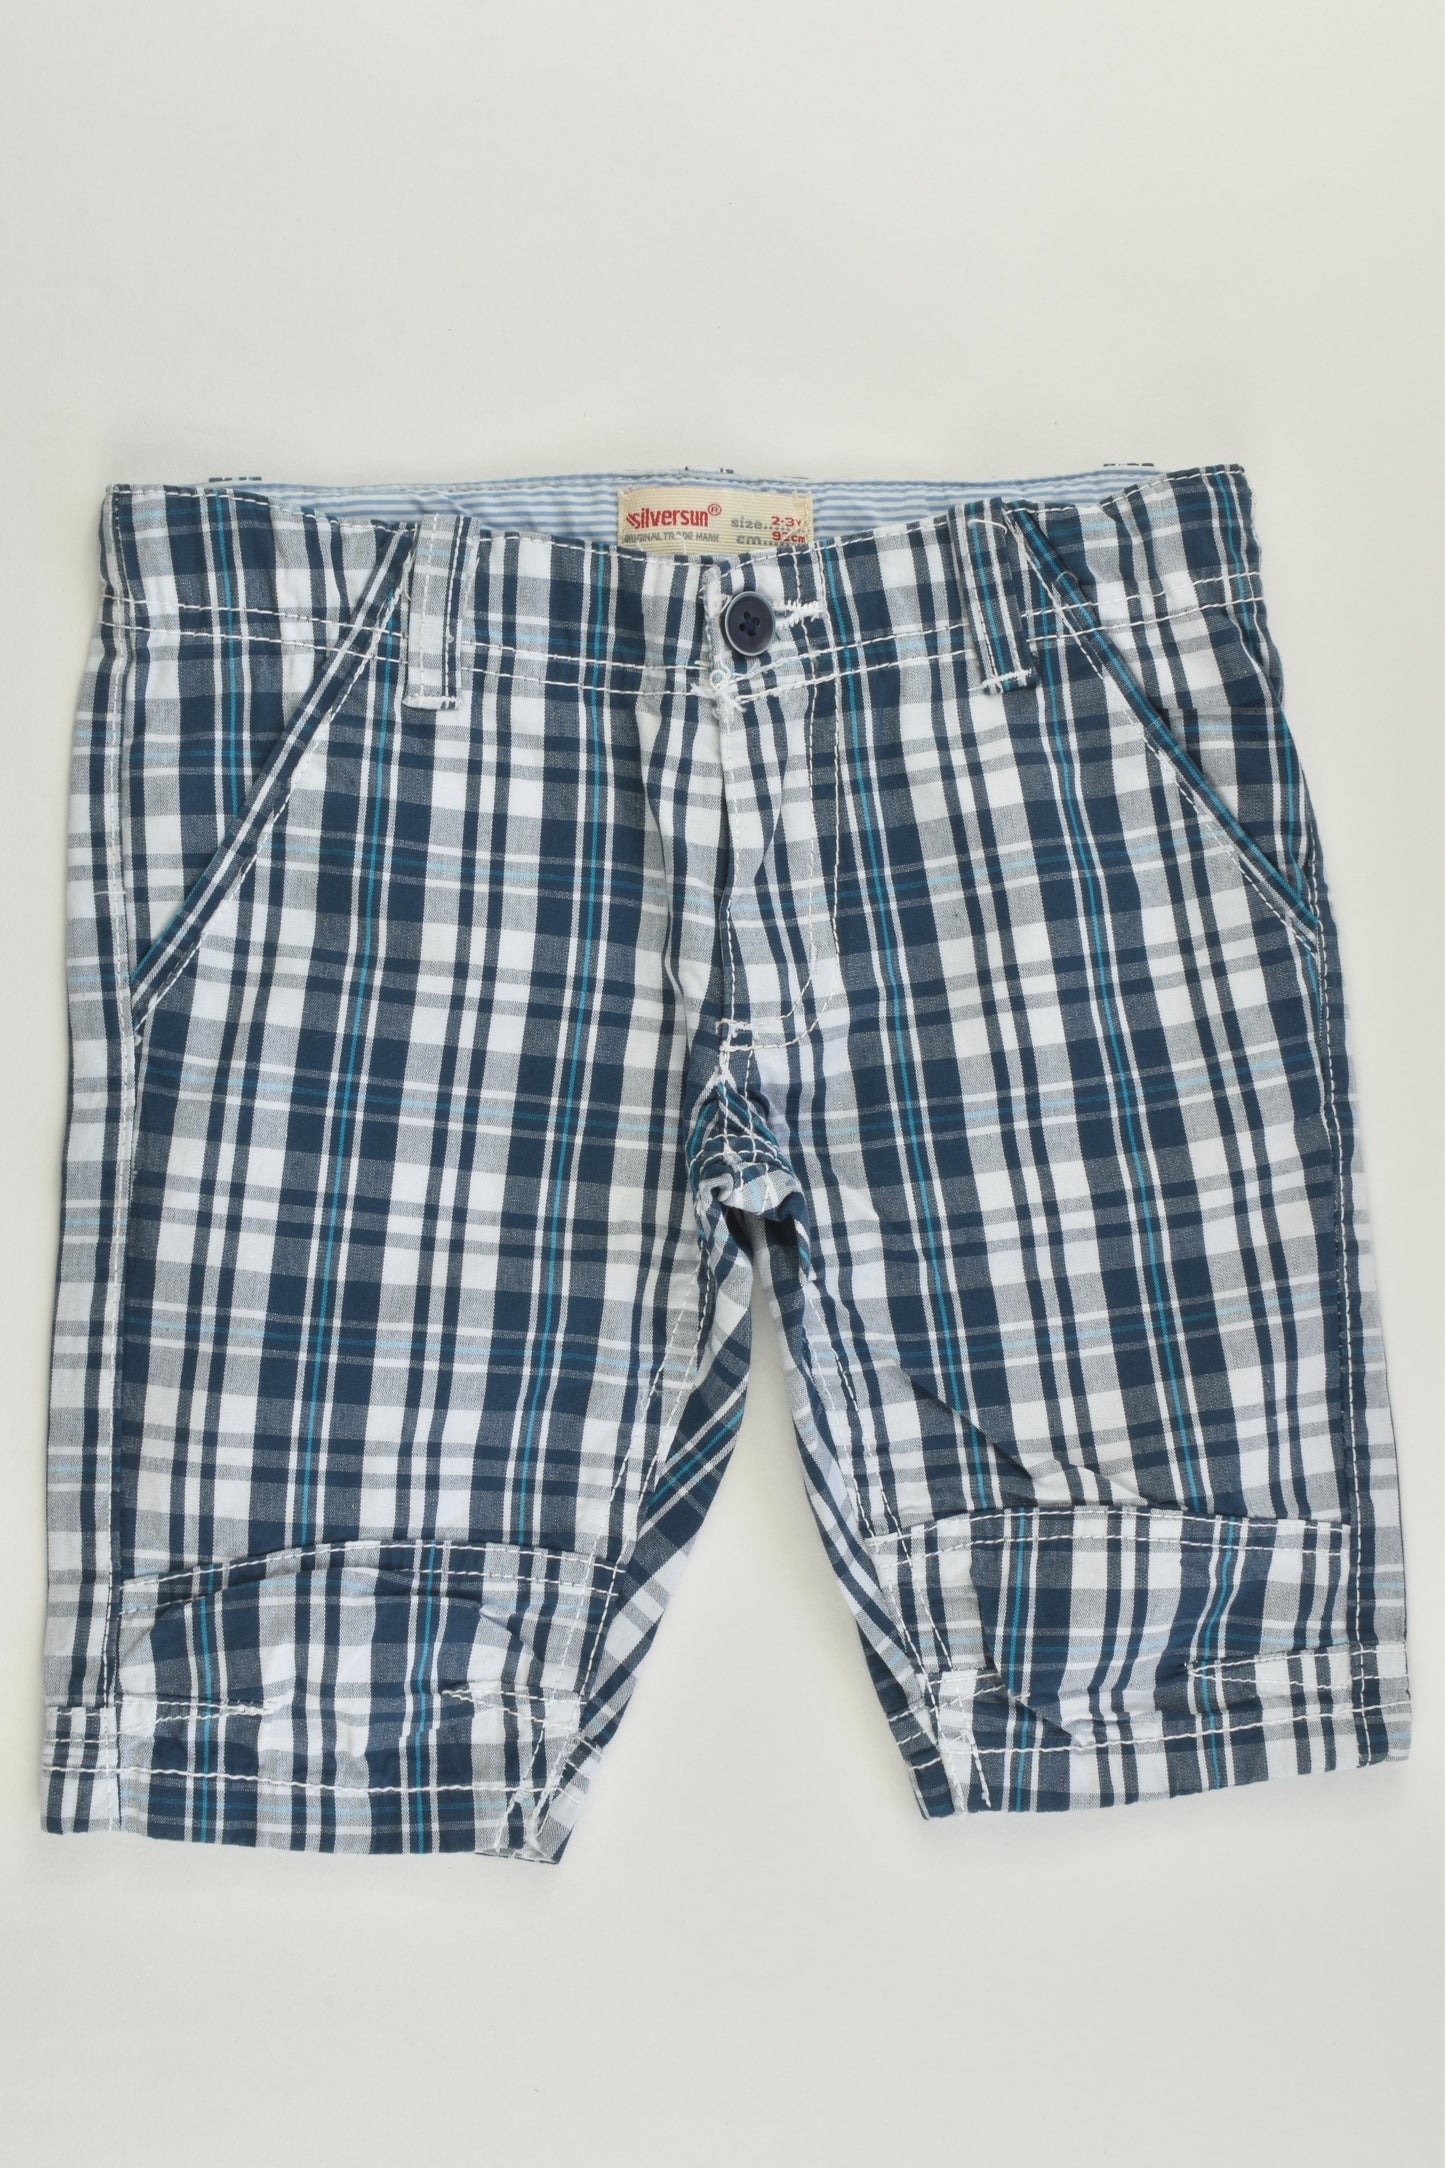 NEW Silversun Size 2-3 (92 cm) Checked Shorts